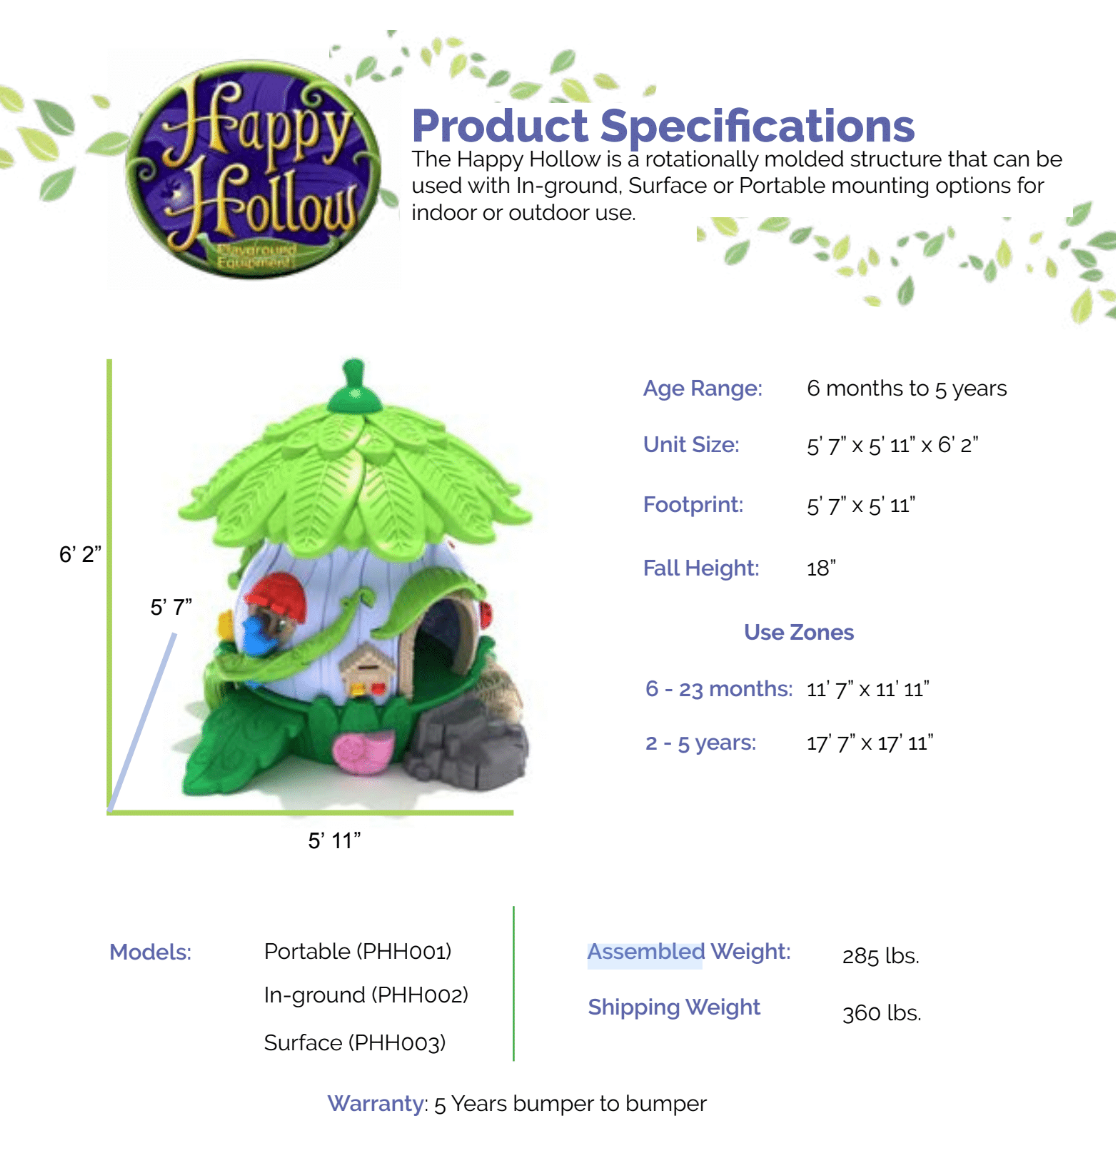 Happy Hollow Playground Product Specifications